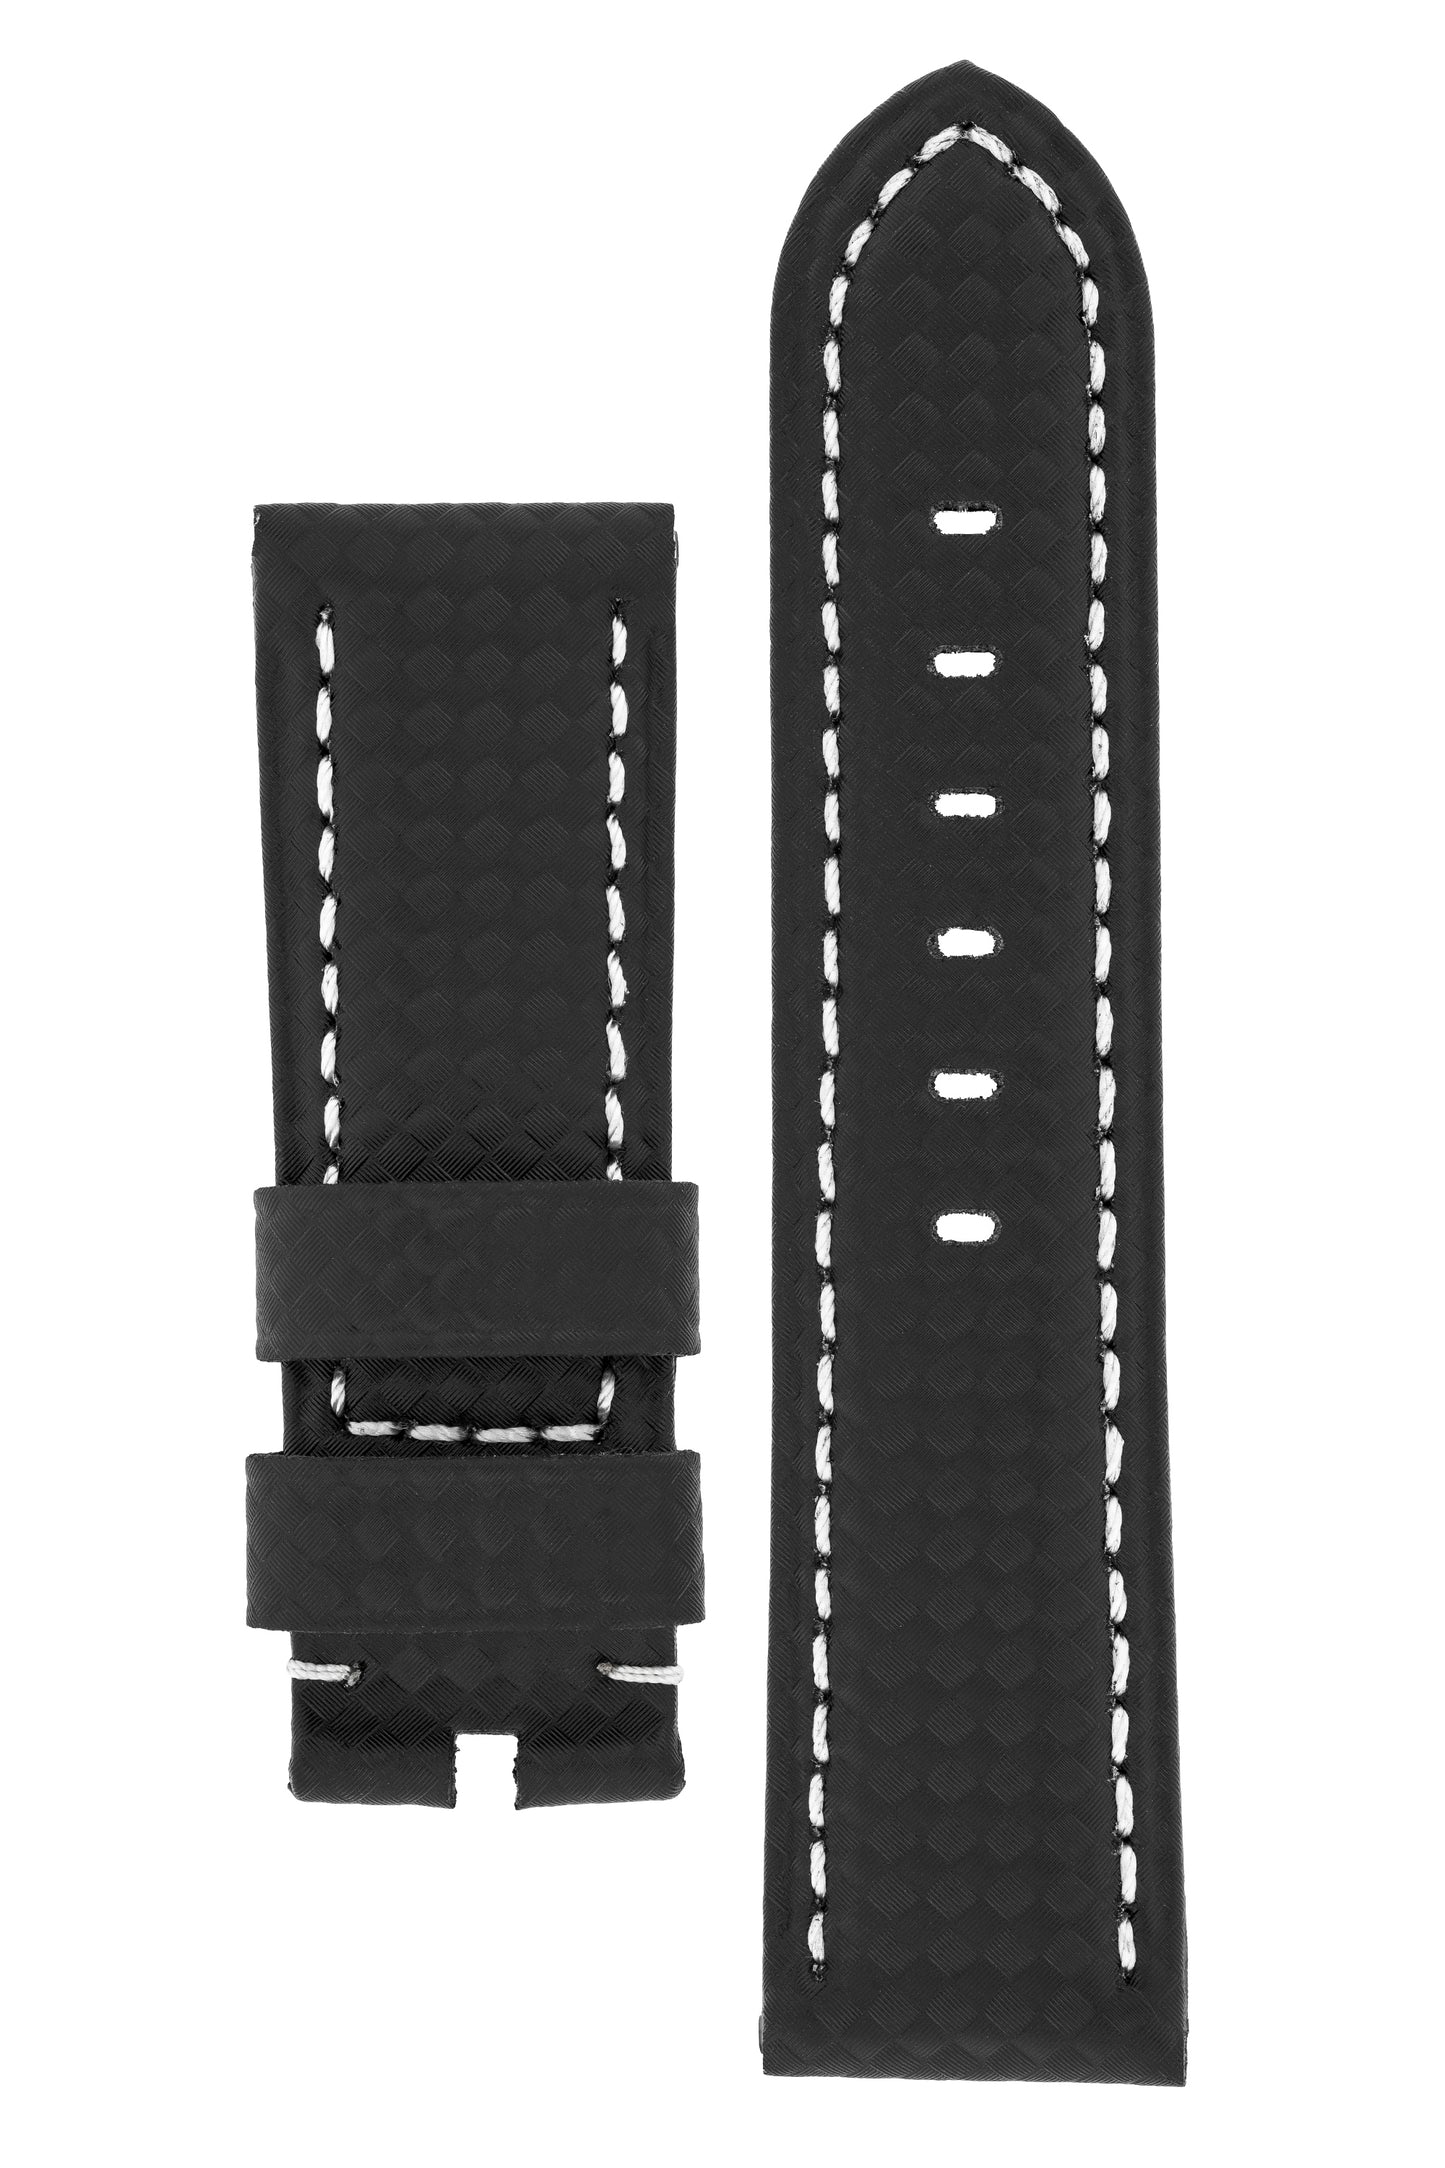 Panerai Style Carbon Leather Watch Strap in BLACK | WatchObsession